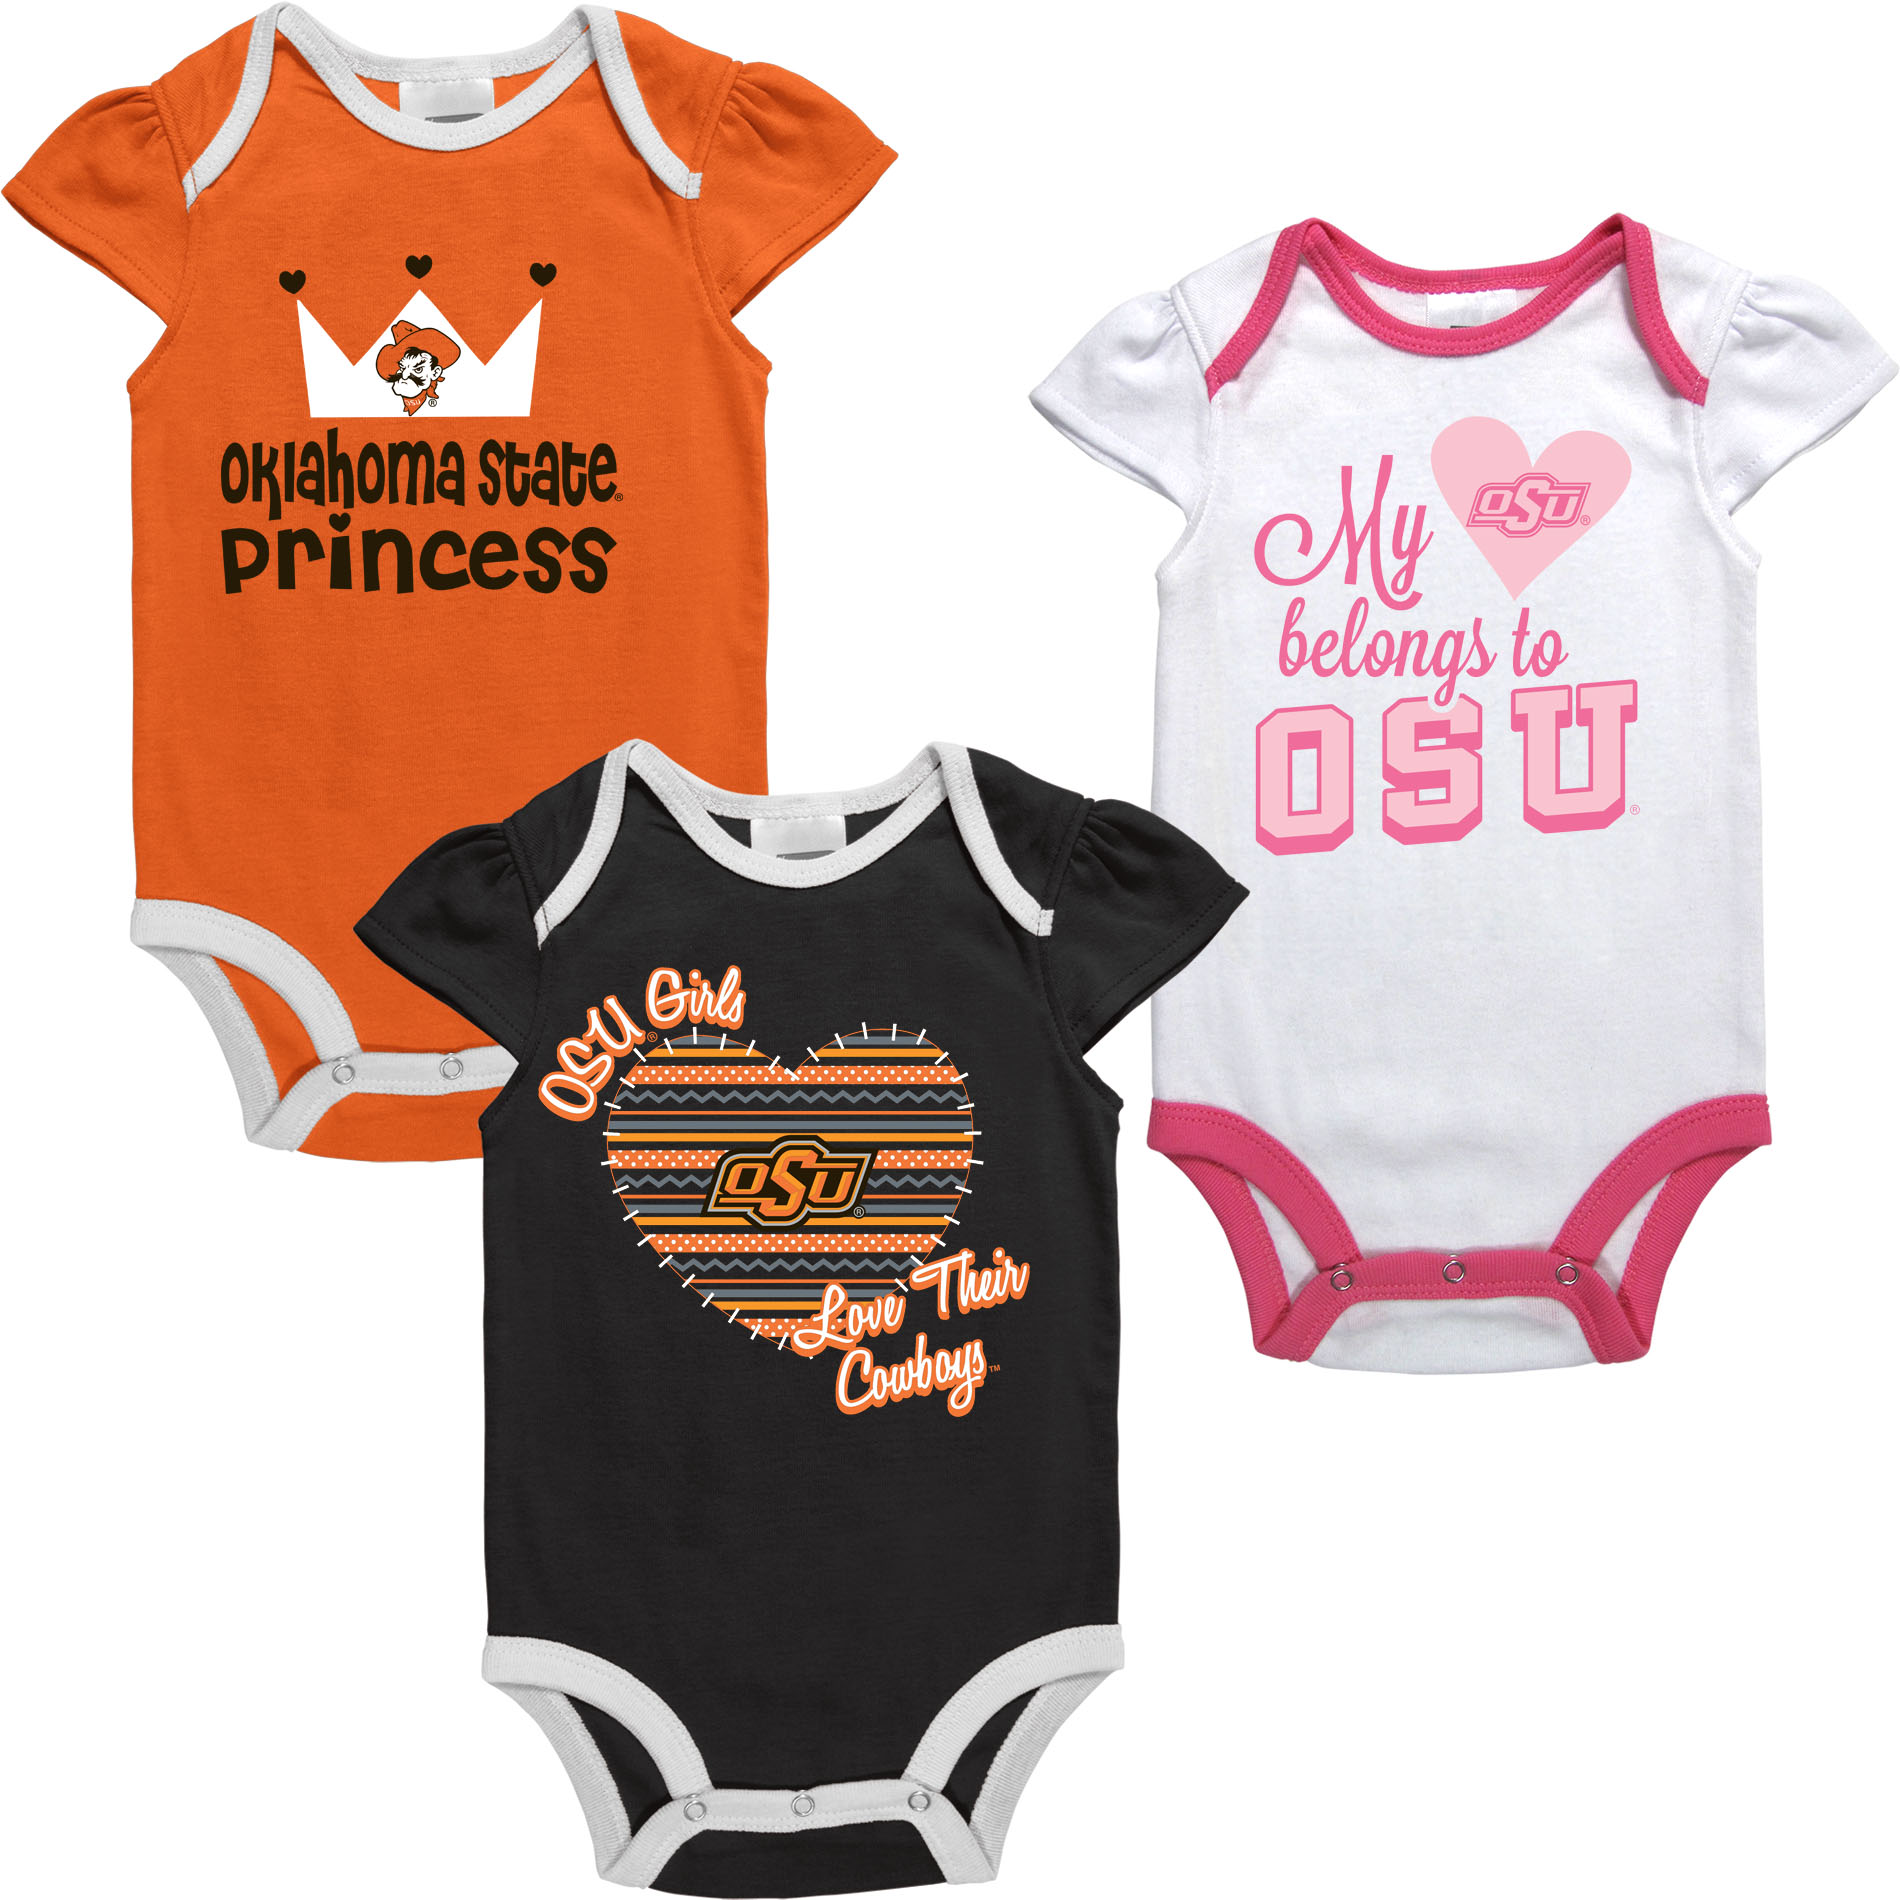 Infant Girl Oklahoma State University&#8211;Stillwater Cowboys and Cowgirls 3-pc Bodysuits